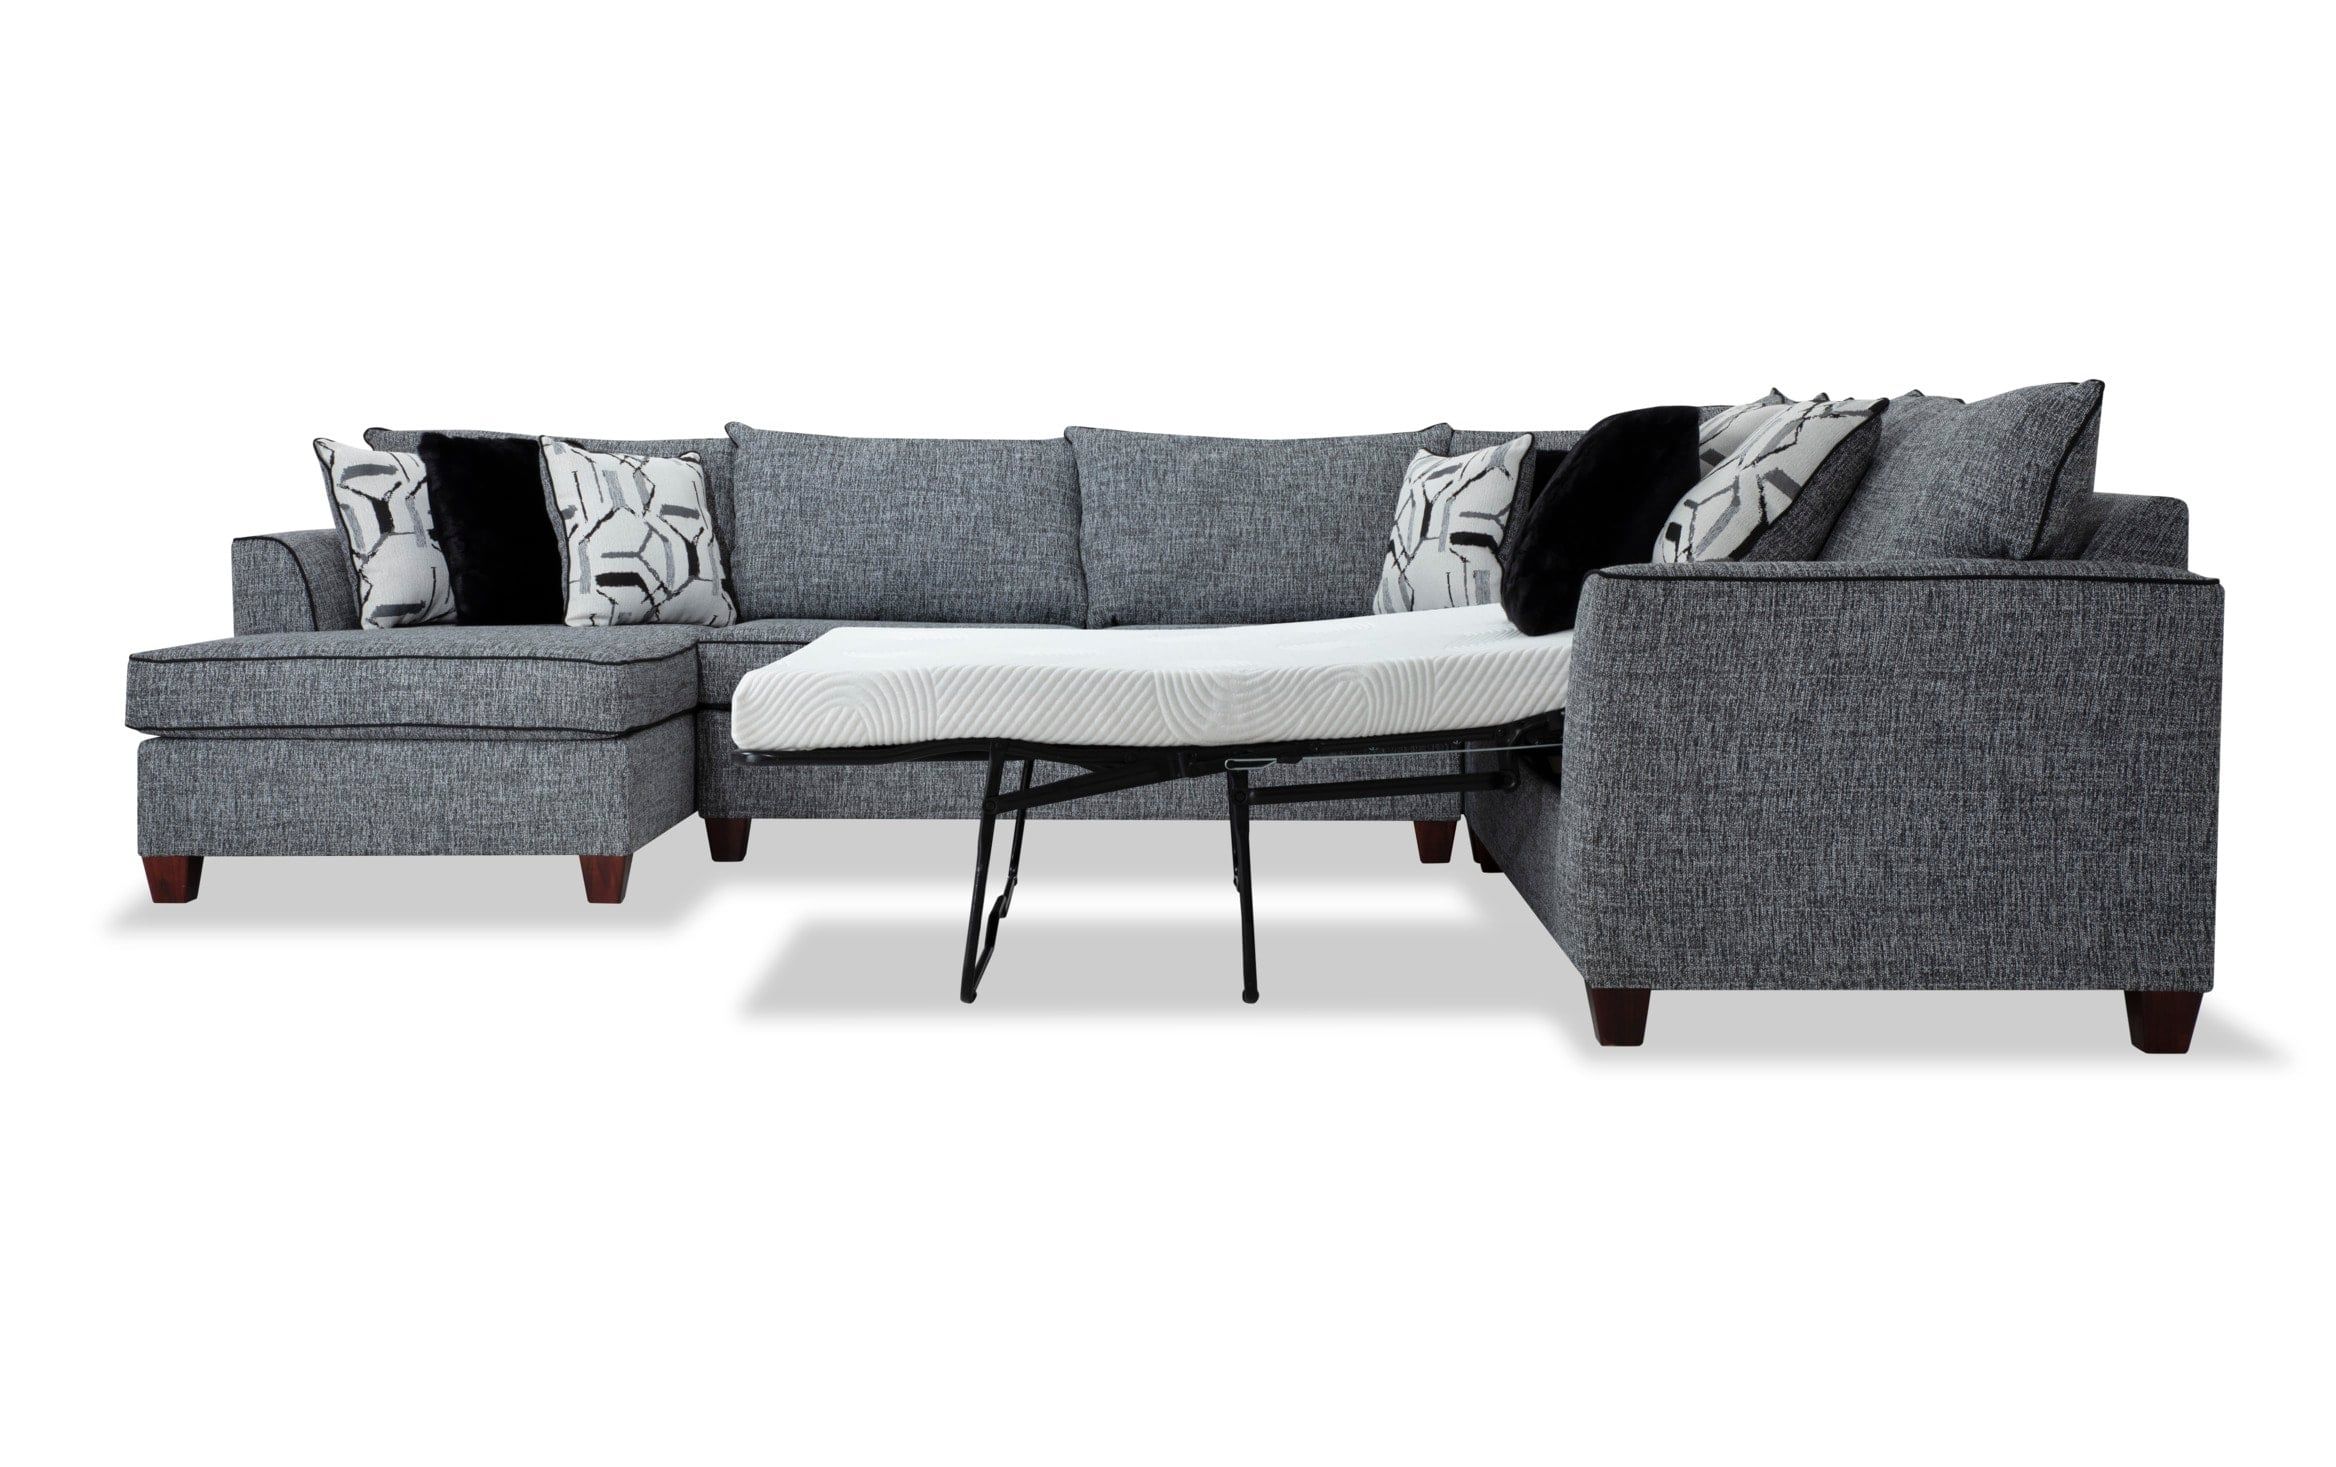 Harlow 142'' 4 Piece Left Arm Facing Bob O Pedic Gel Right Arm Facing Full Sleeper  Sectional | Bob's Discount Furniture Intended For Left Or Right Facing Sleeper Sectional Sofas (View 10 of 20)